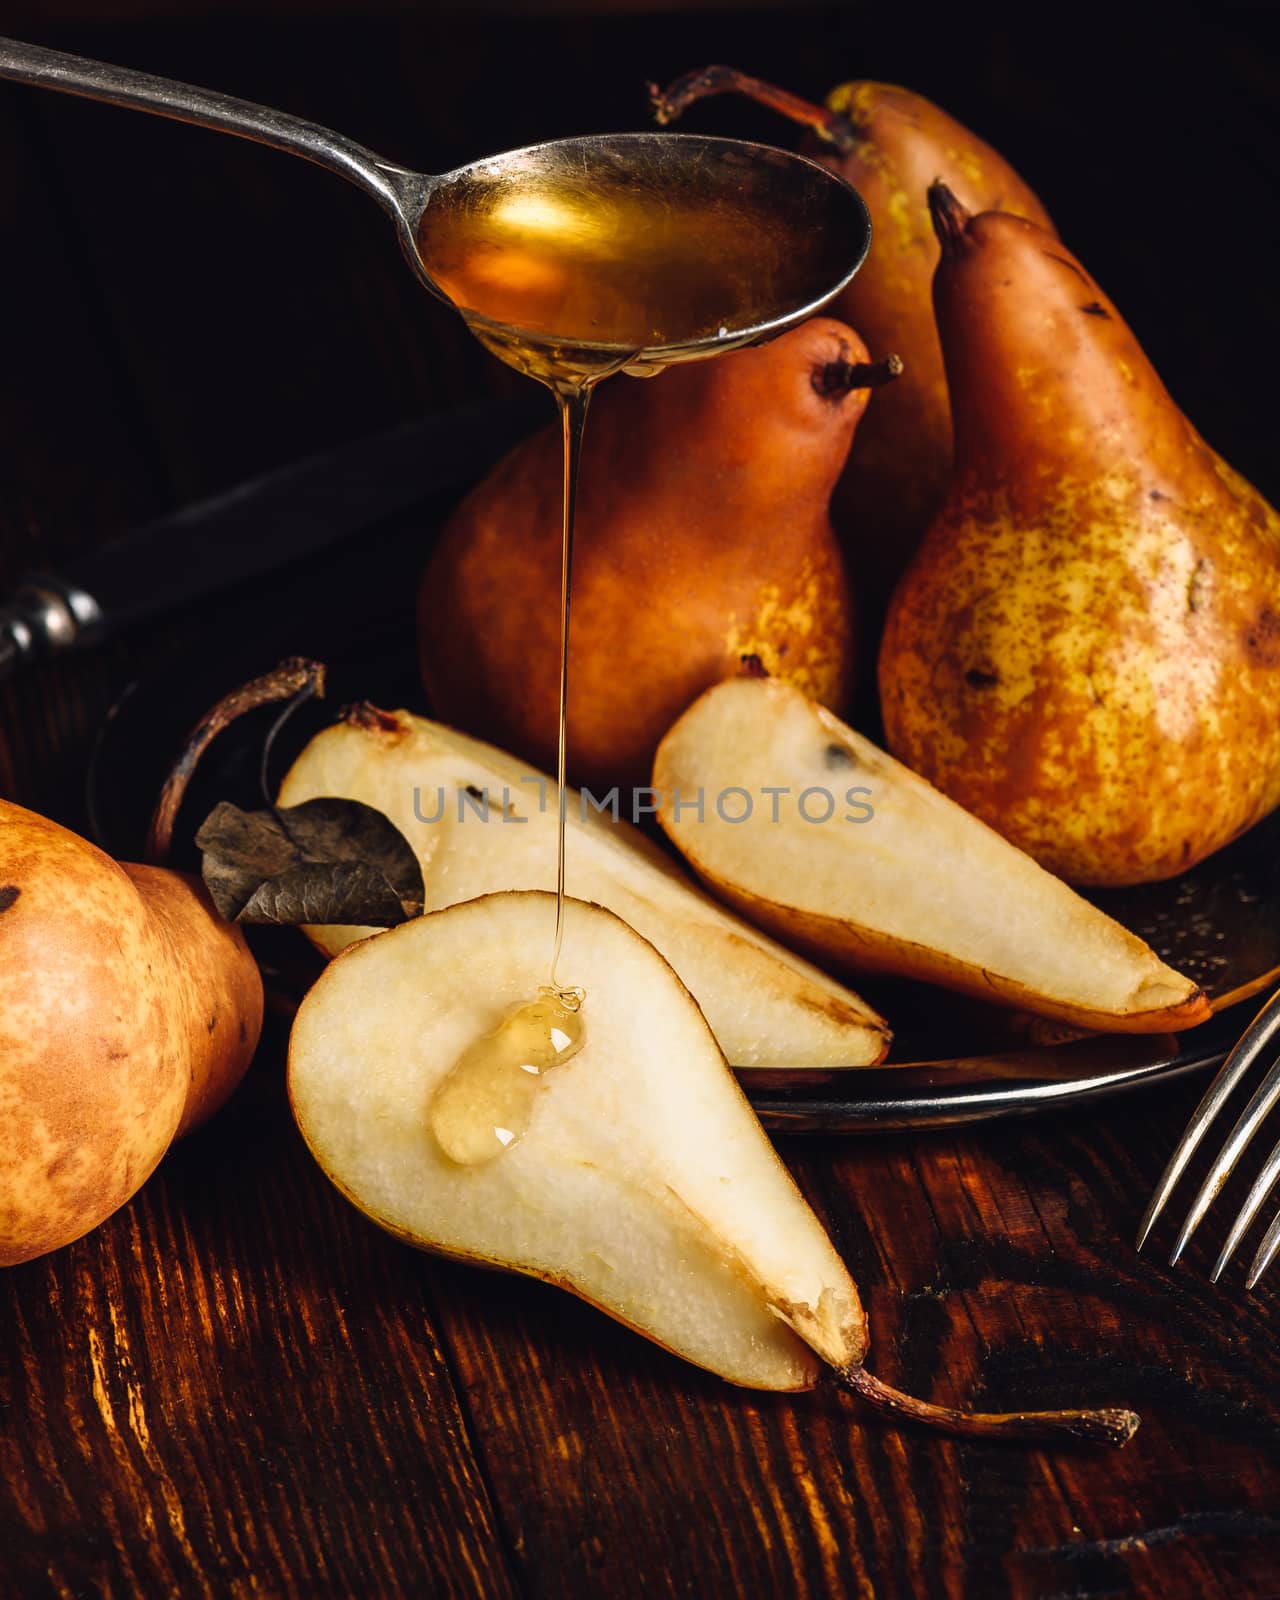 Golden Pears with Sliced One and Spoonful of Honey.